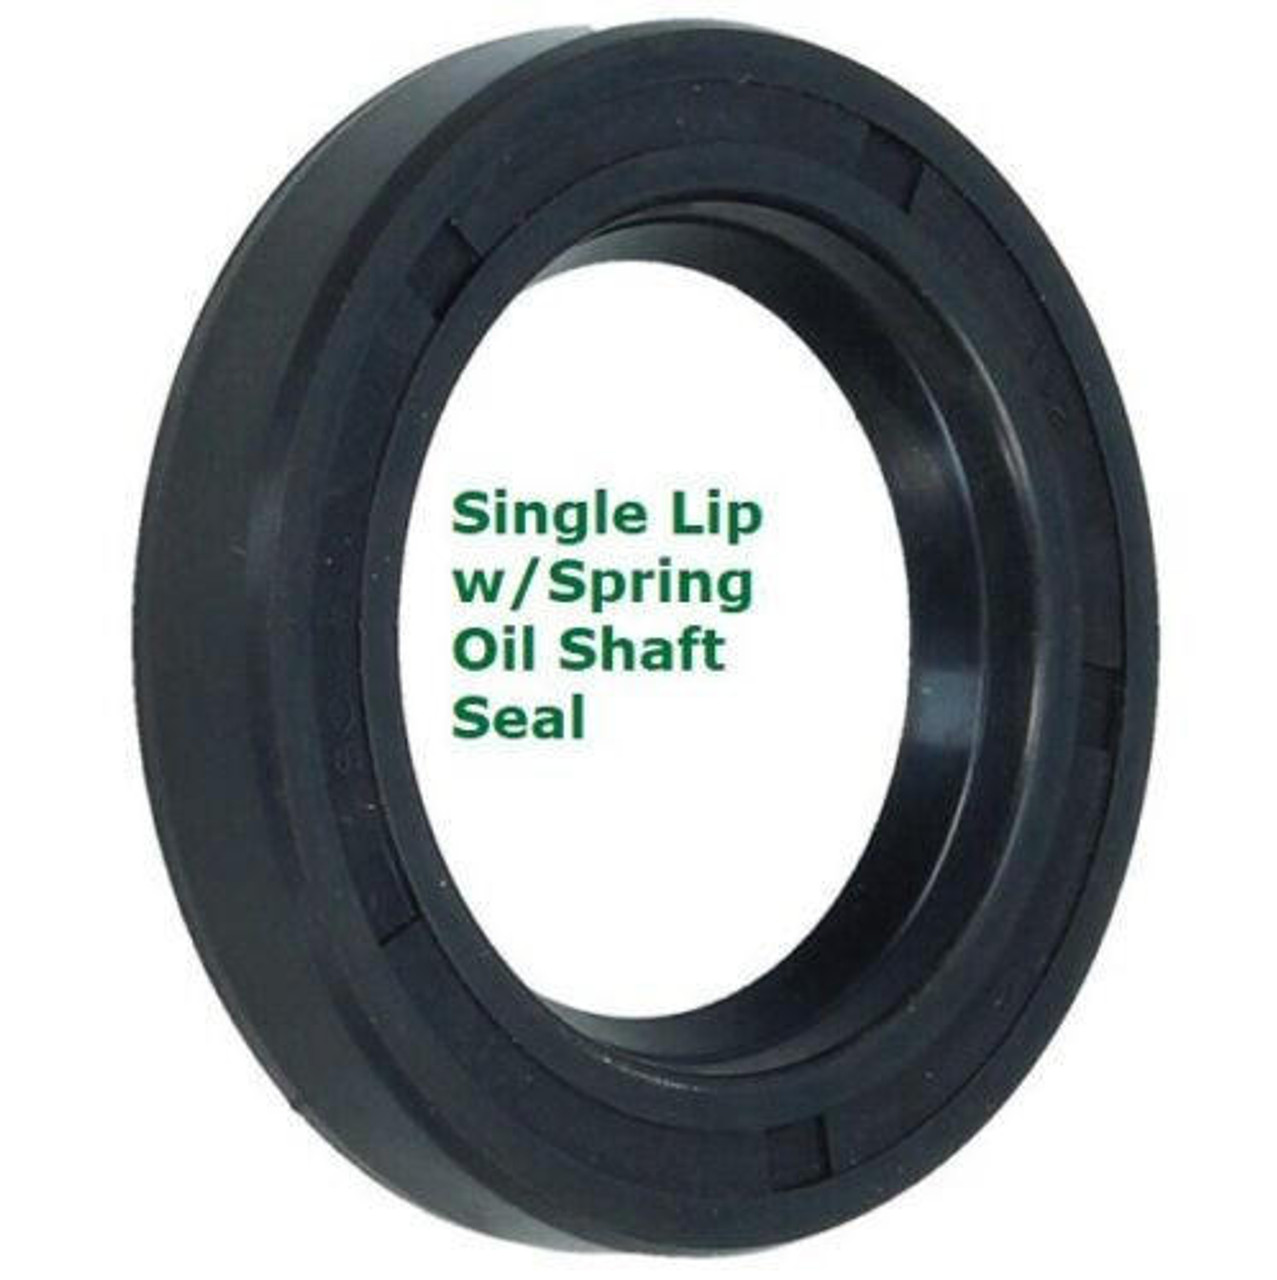 Metric Oil Shaft Seal 95 x 115 x 13mm   Price for 1 pc